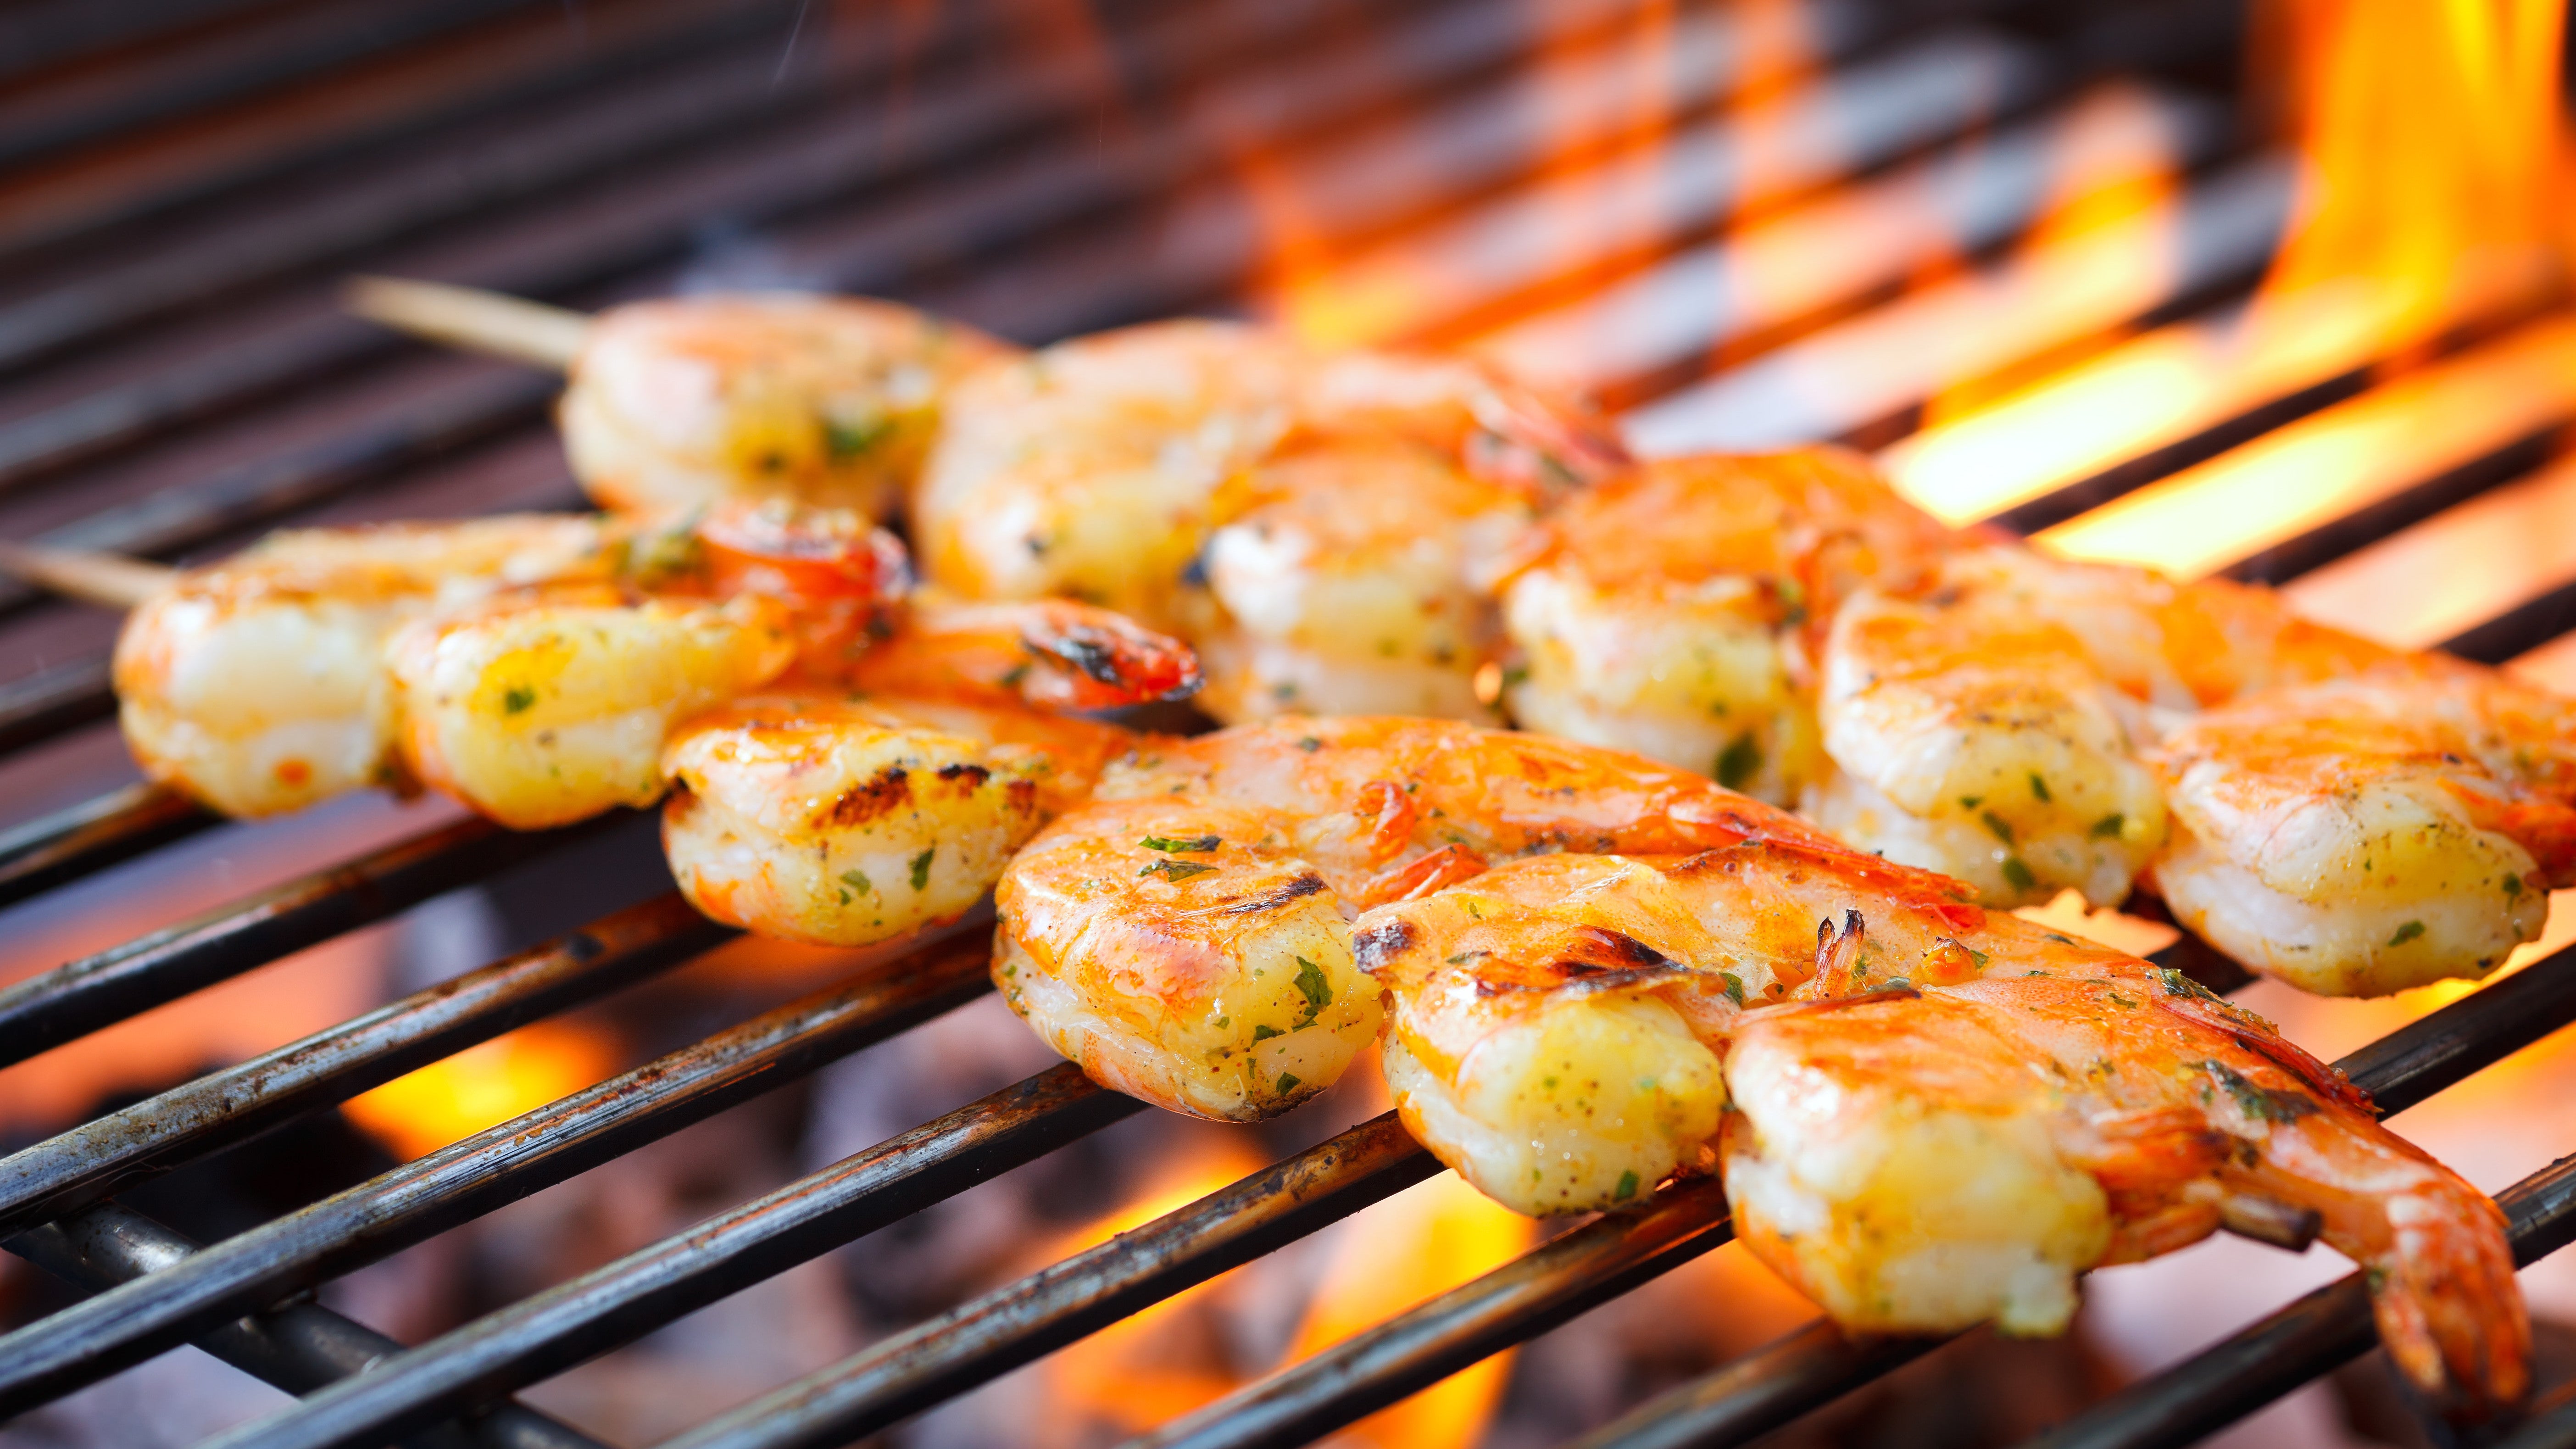 Brush Your Prawns With A Little Mayo Before Grilling